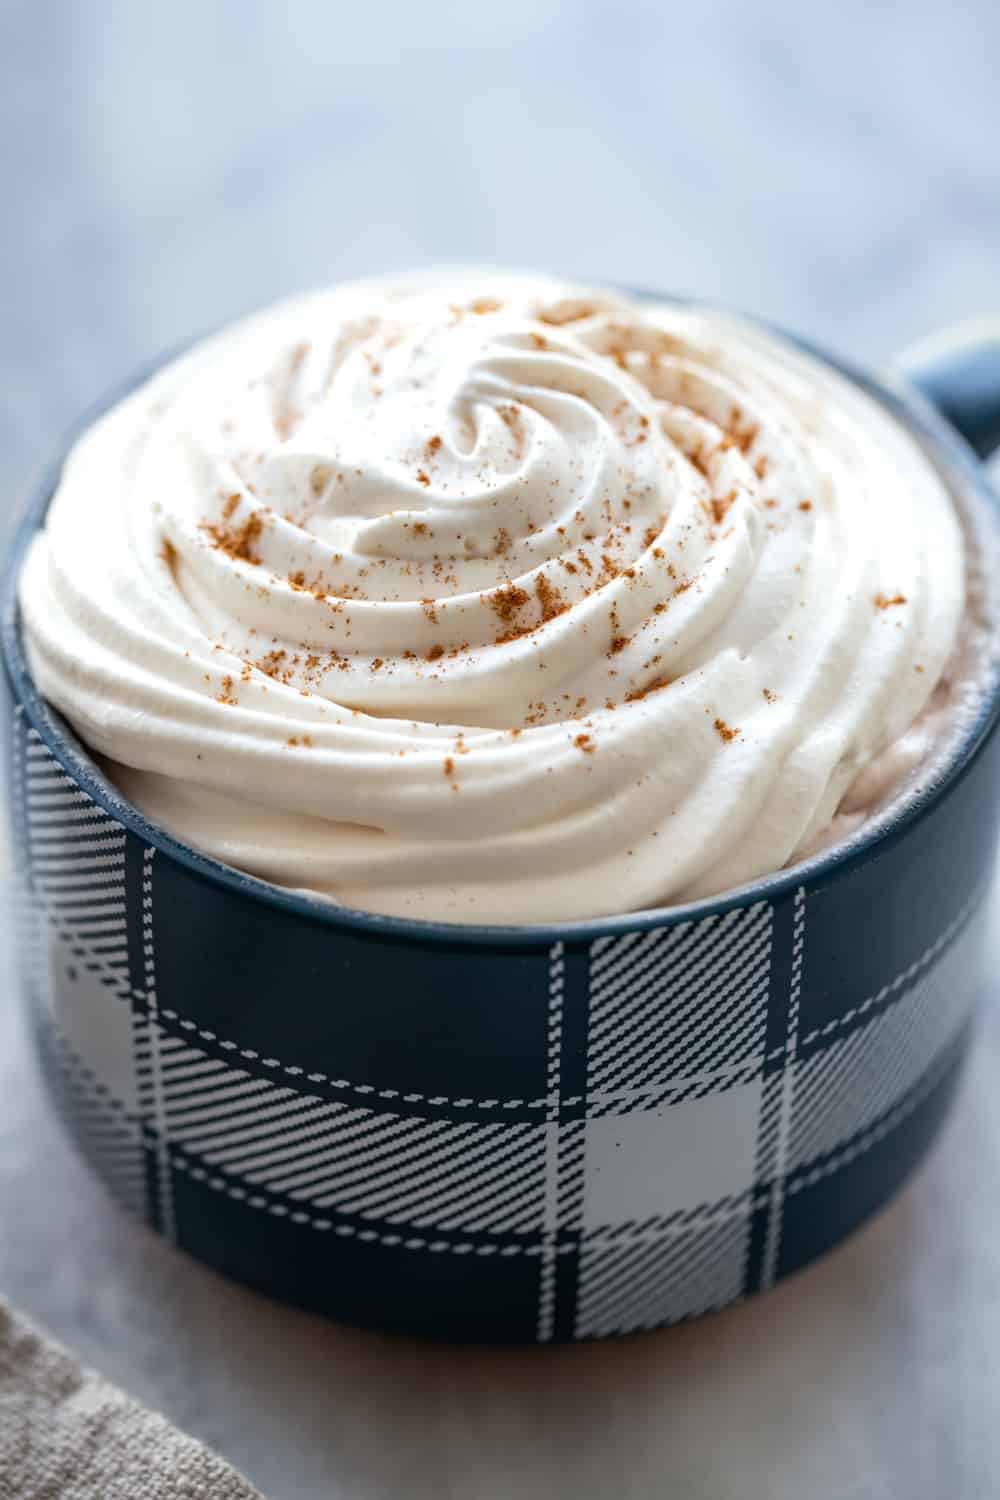 How to Make Whipped Cream (Homemade in 8 Minutes Max)